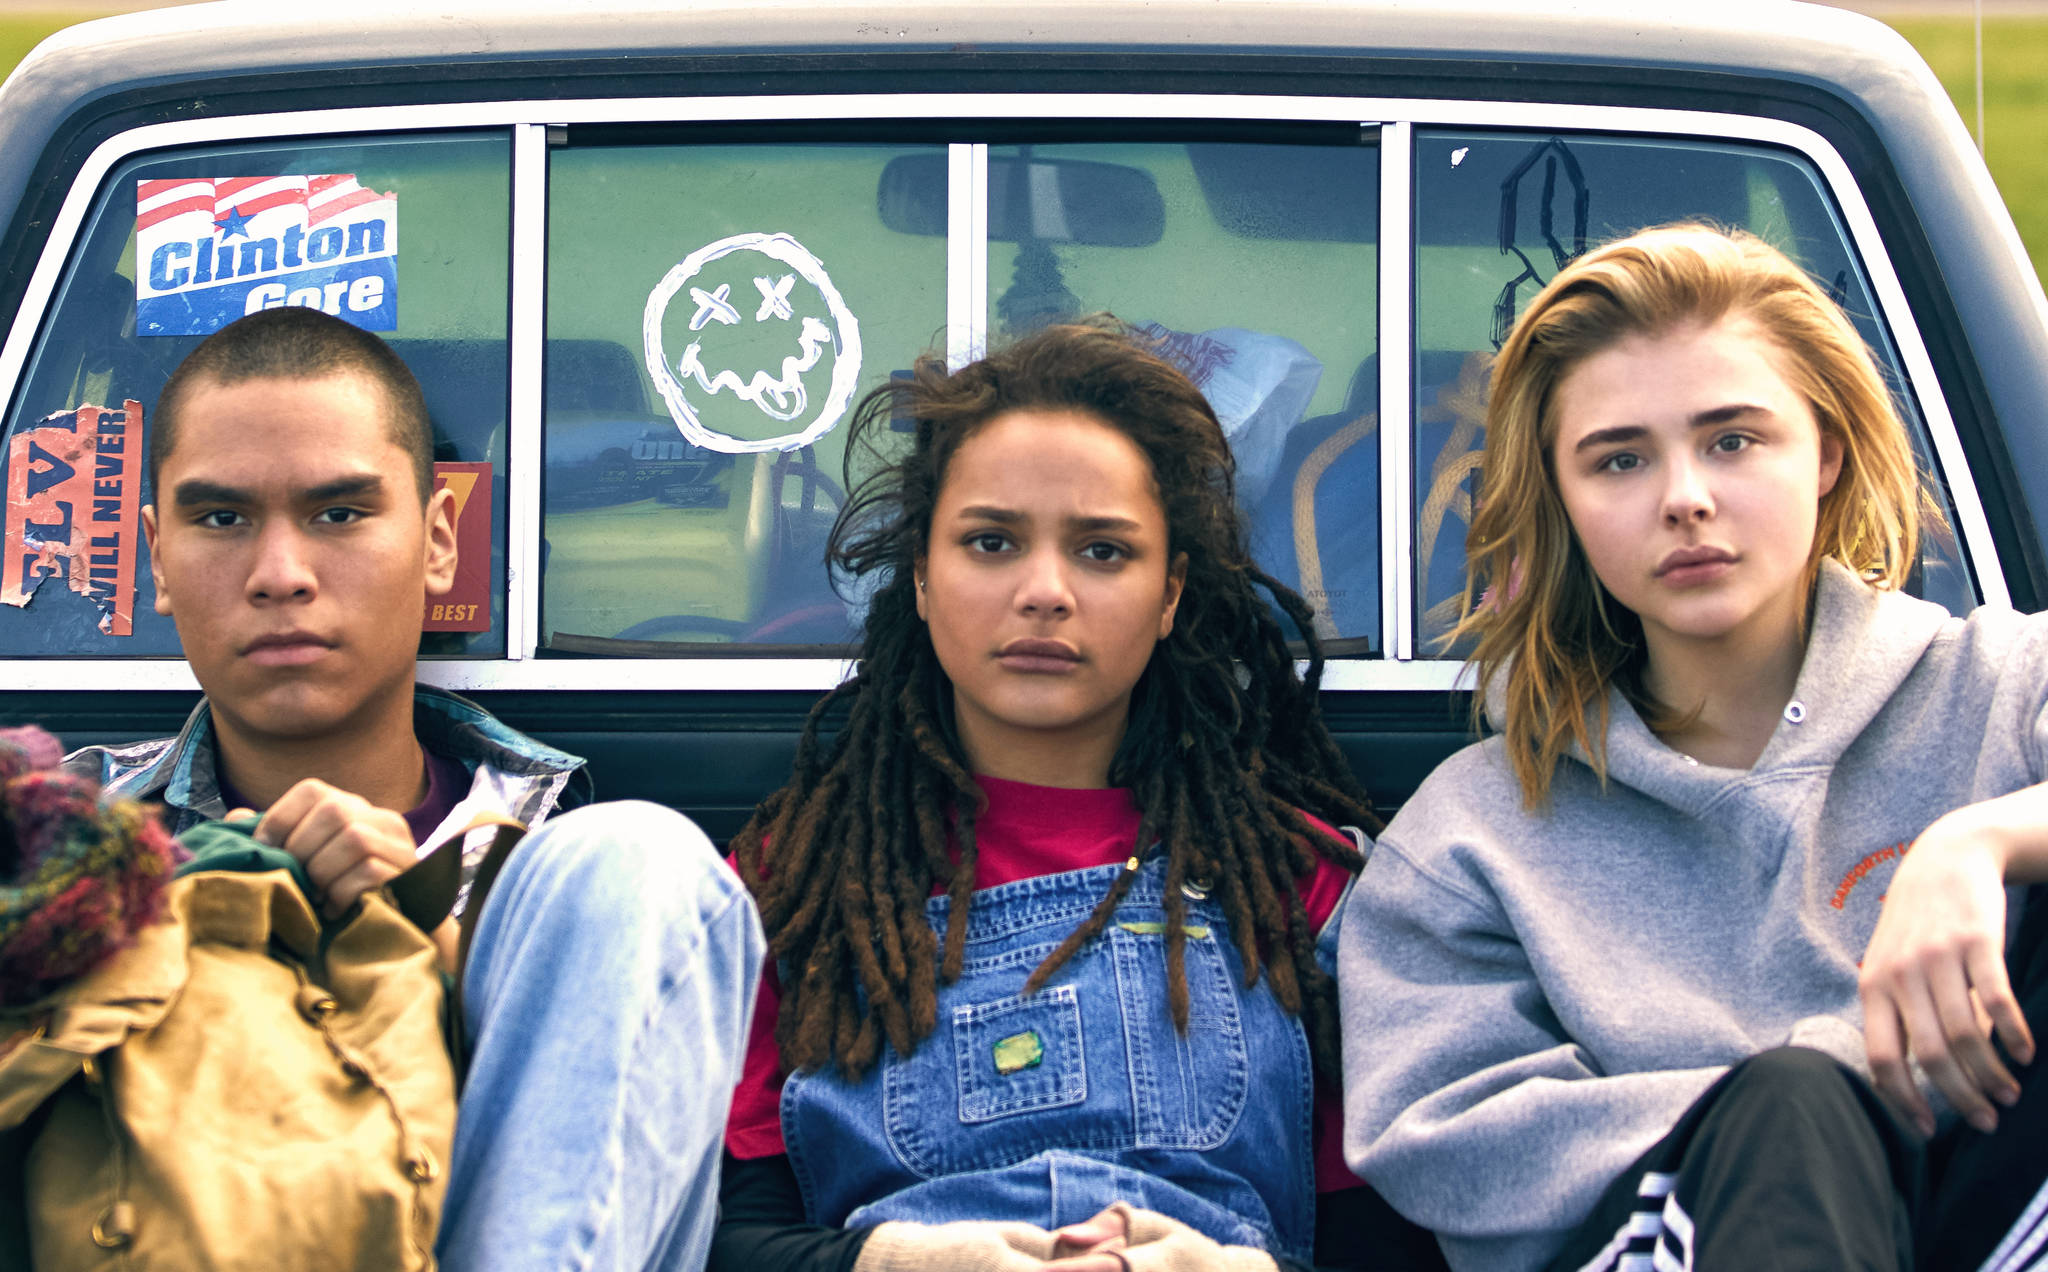 Teens bond at a gay conversion camp in The Miseducation of Cameron Post. Photo courtesy Beachside Films